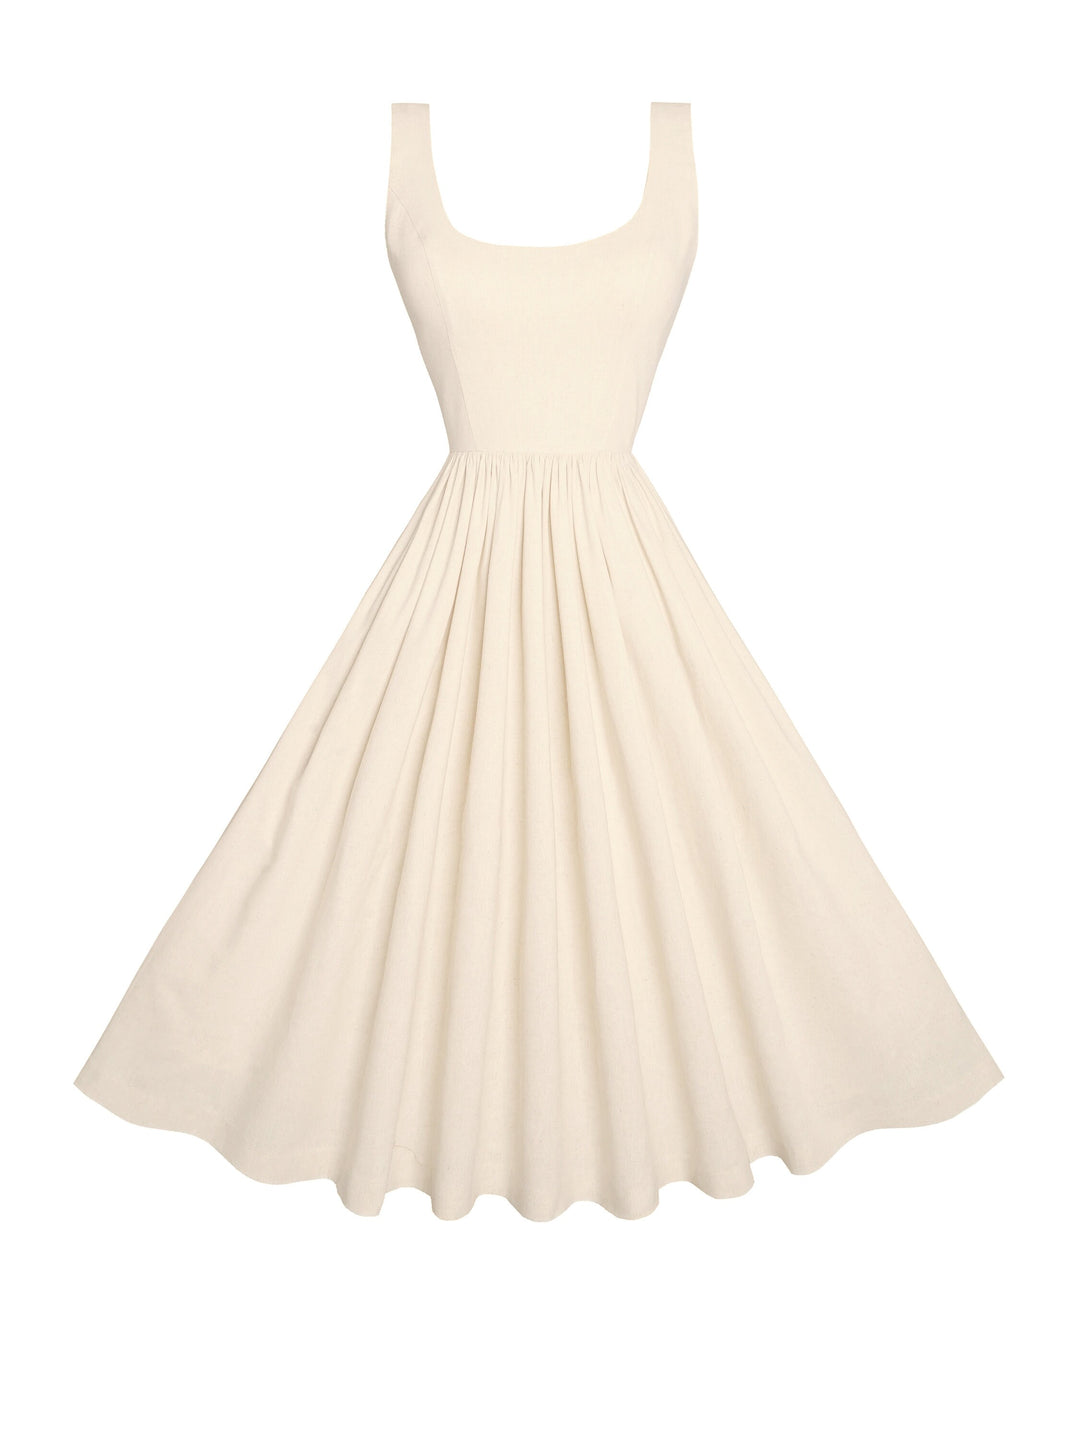 MTO - Emily Dress in Parchment Ivory Linen